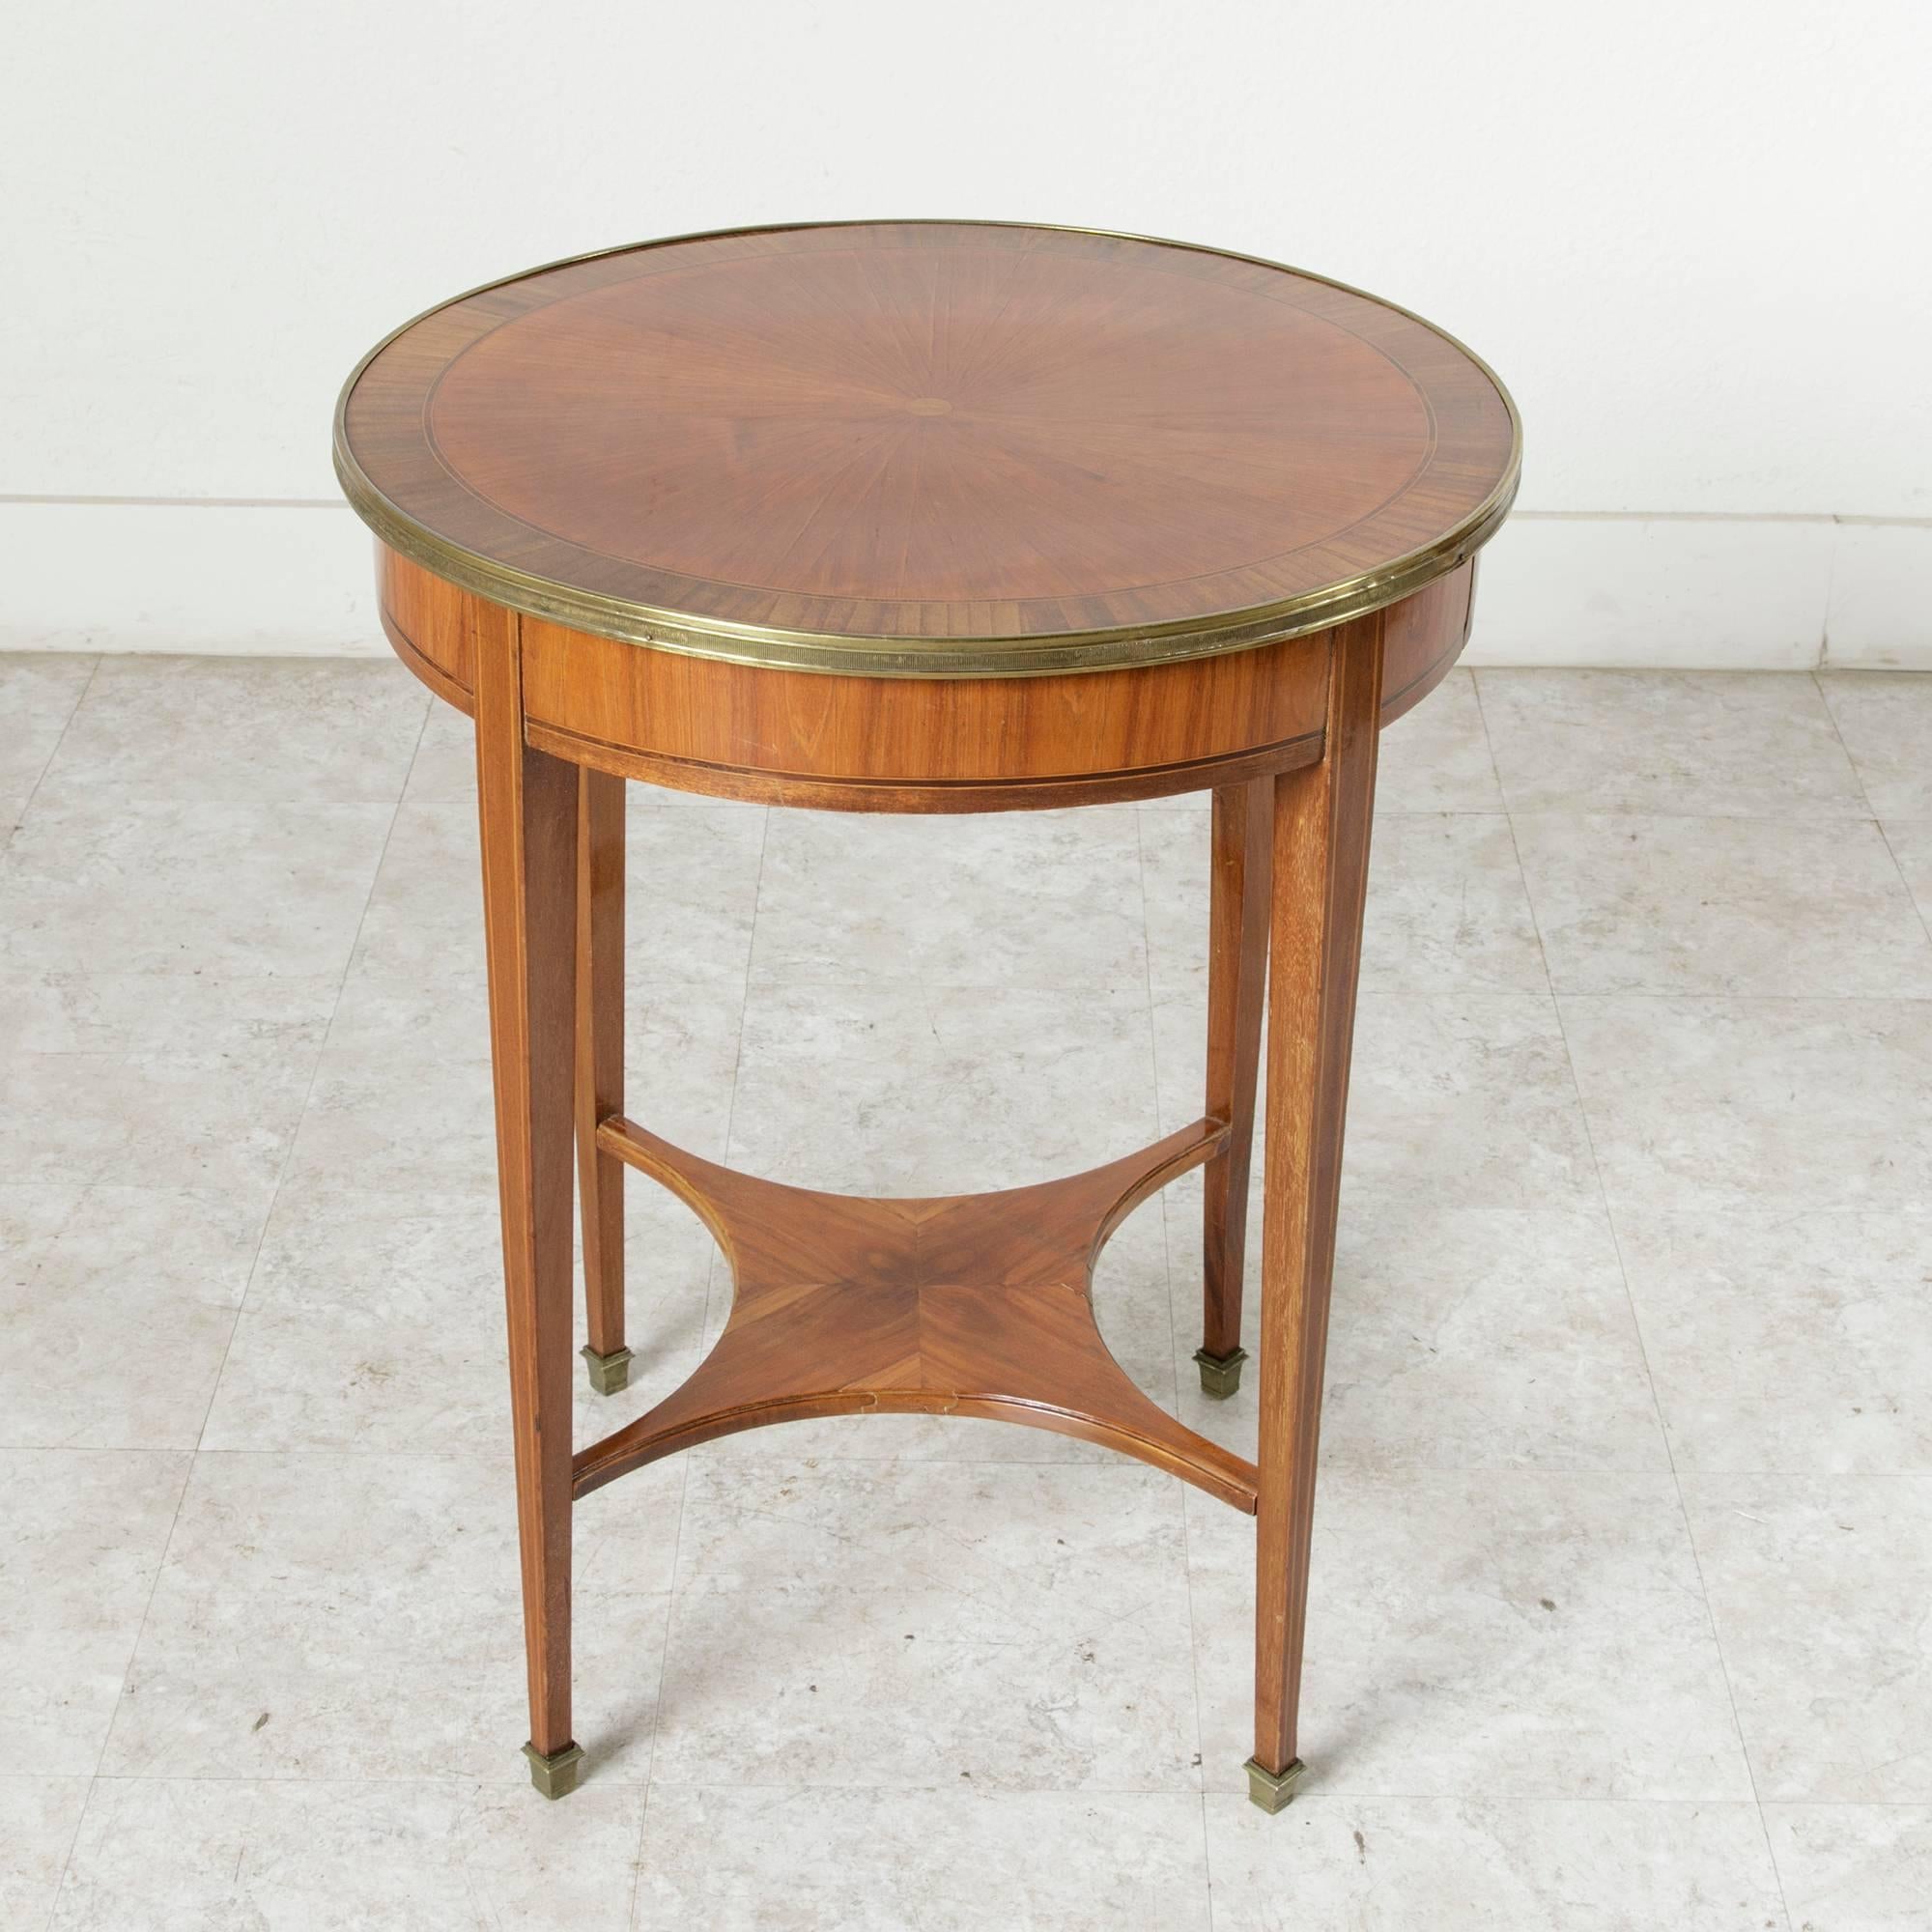 Inlay Art Deco Period Rosewood and Walnut Marquetry Gueridon or Side Table, Brass Trim